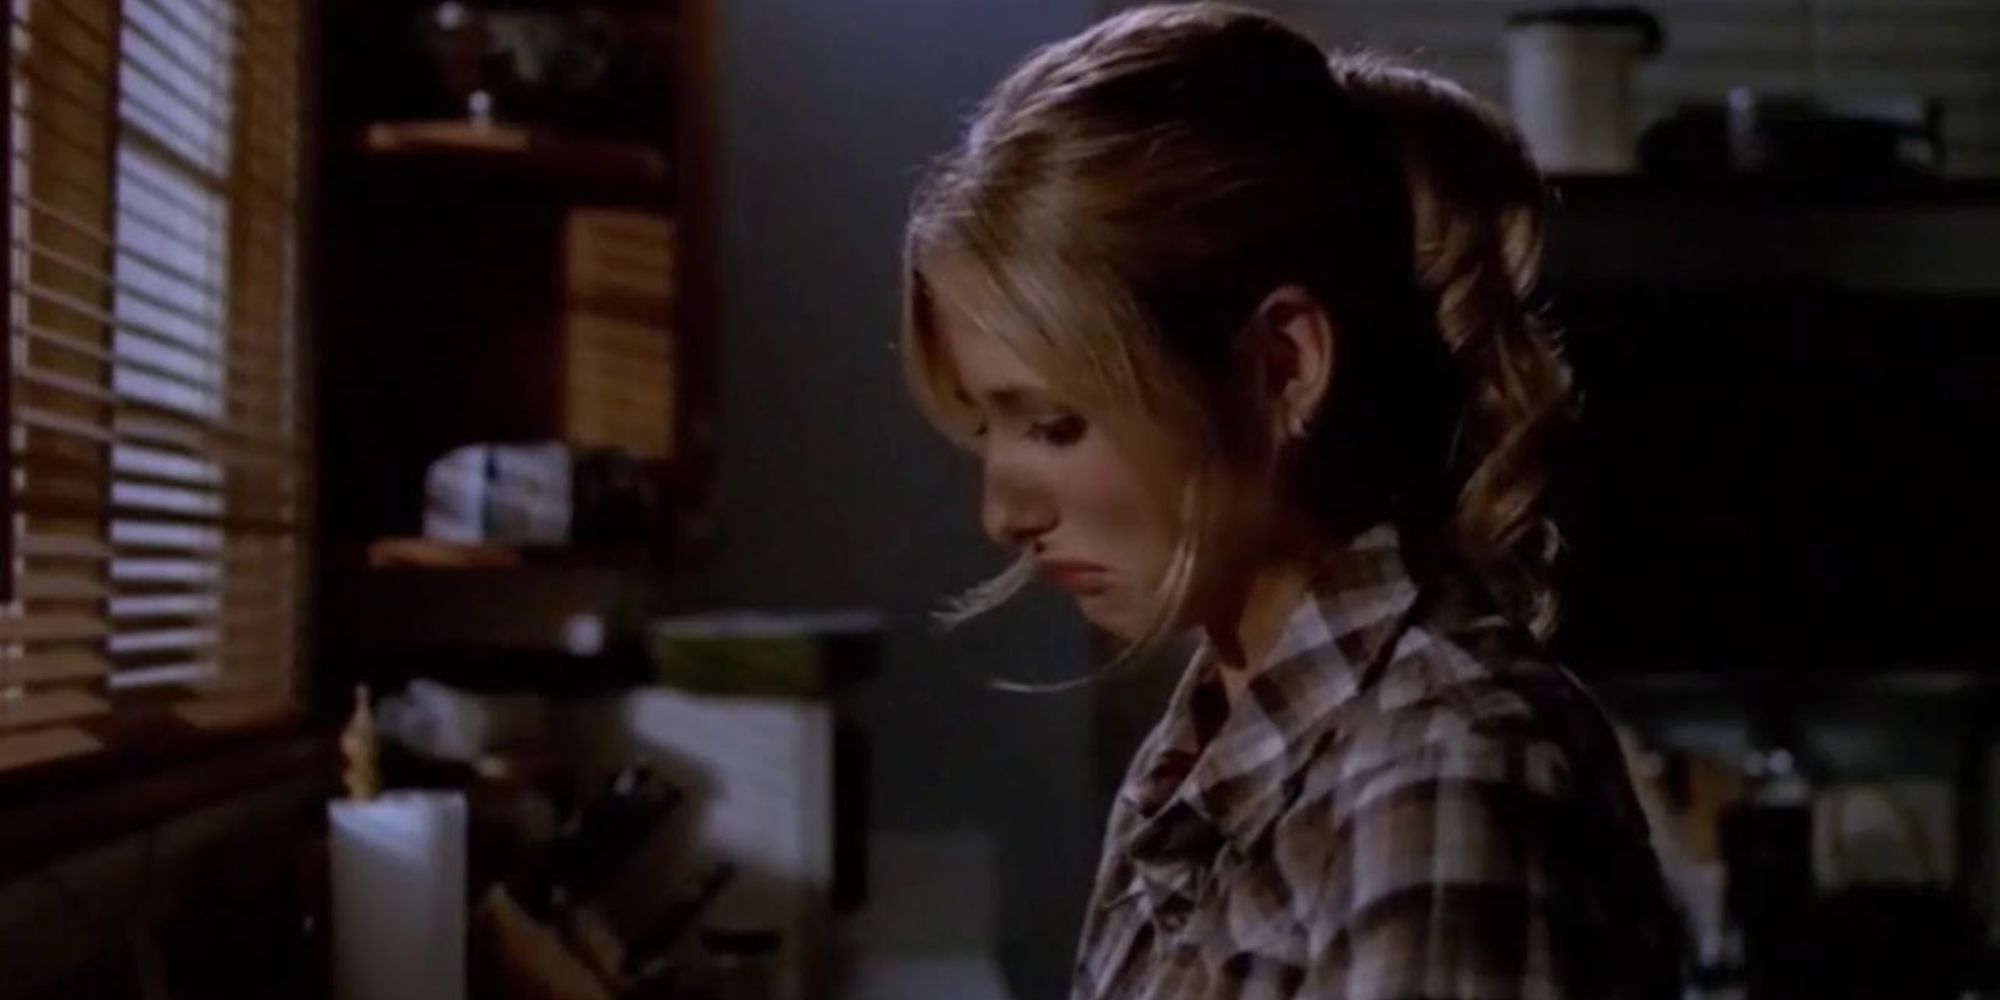 Buffy cries in the kitchen in Listening to Fear